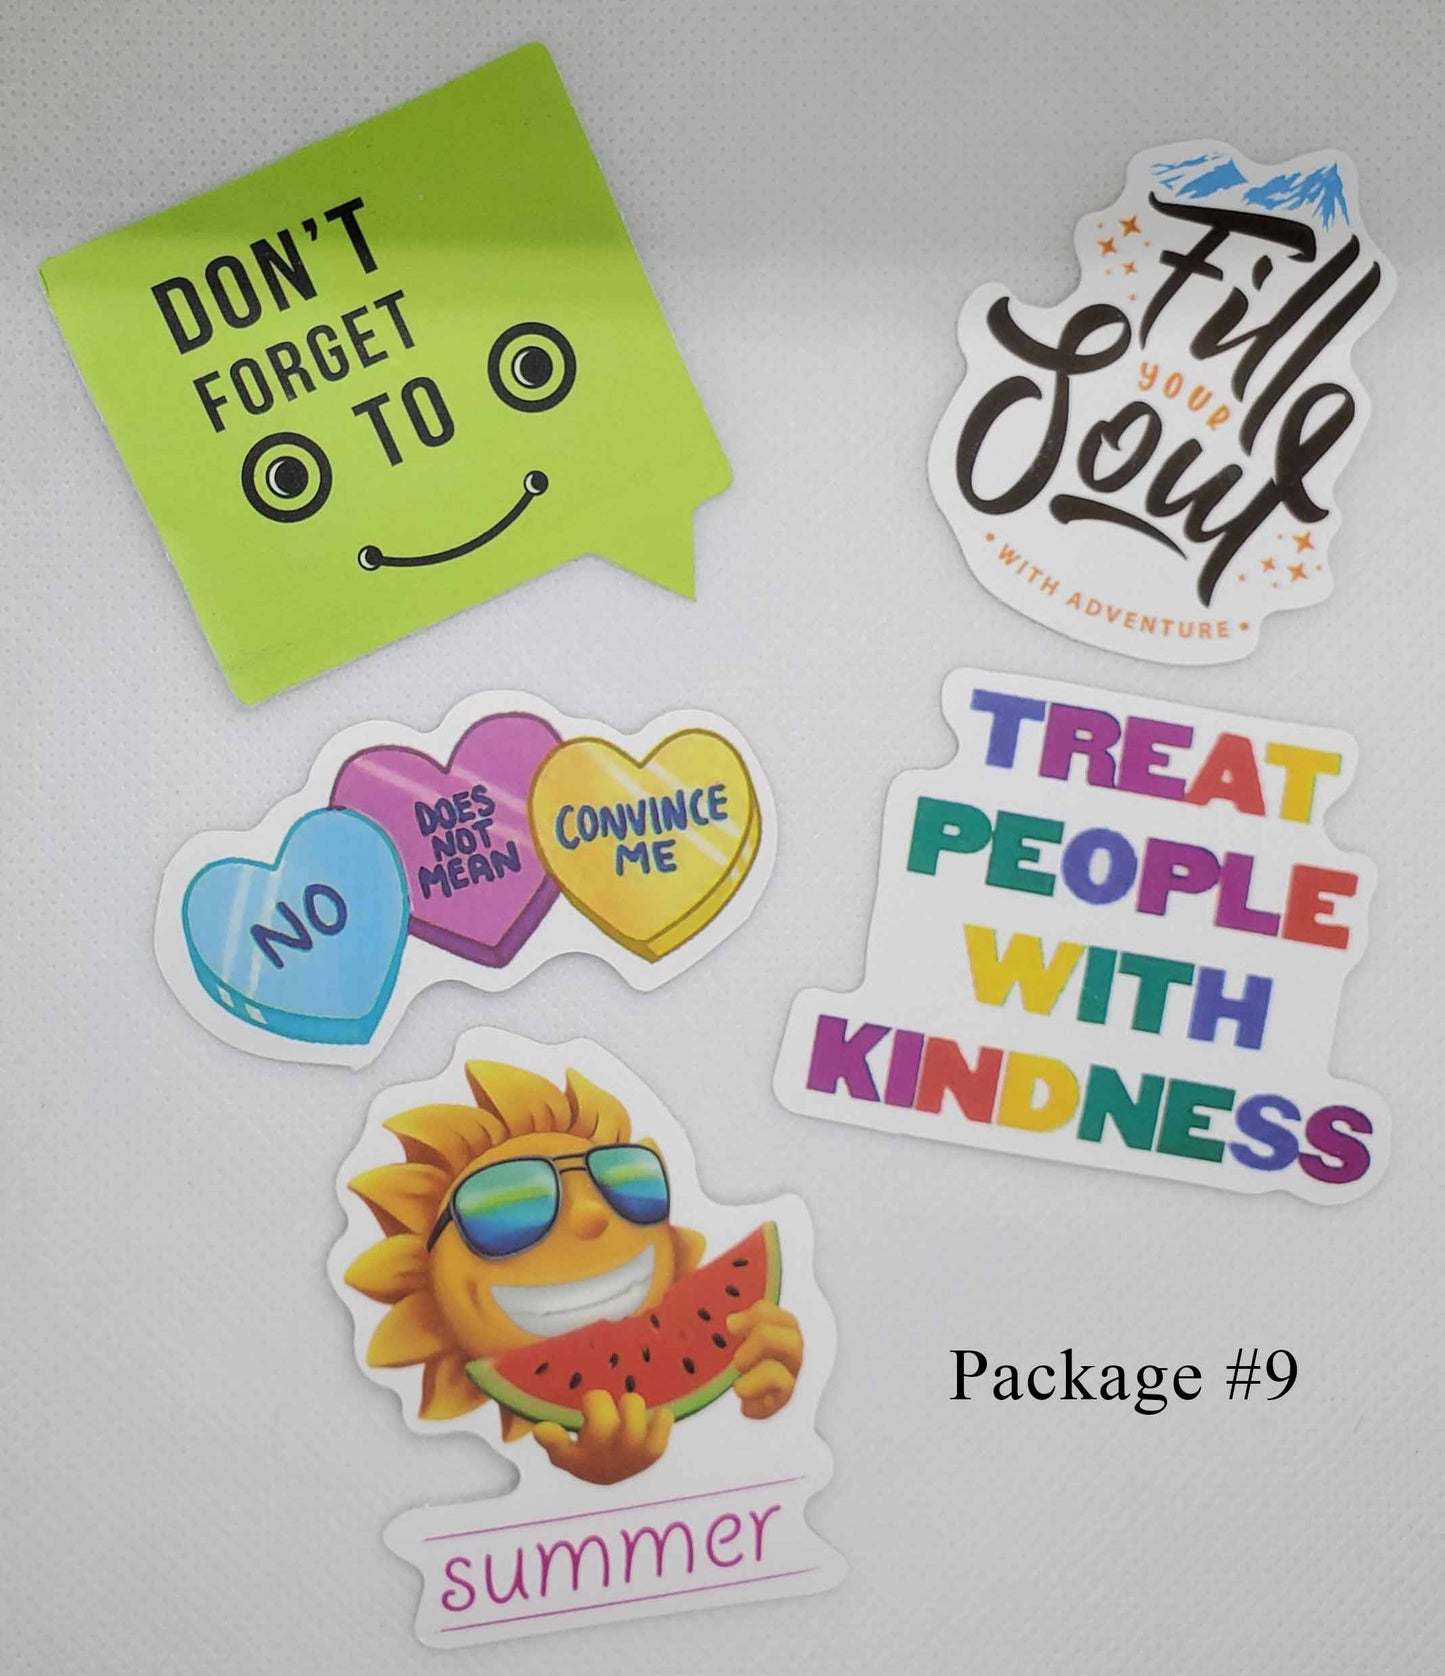 Motivational Vibes Stickers - FREE Shipping